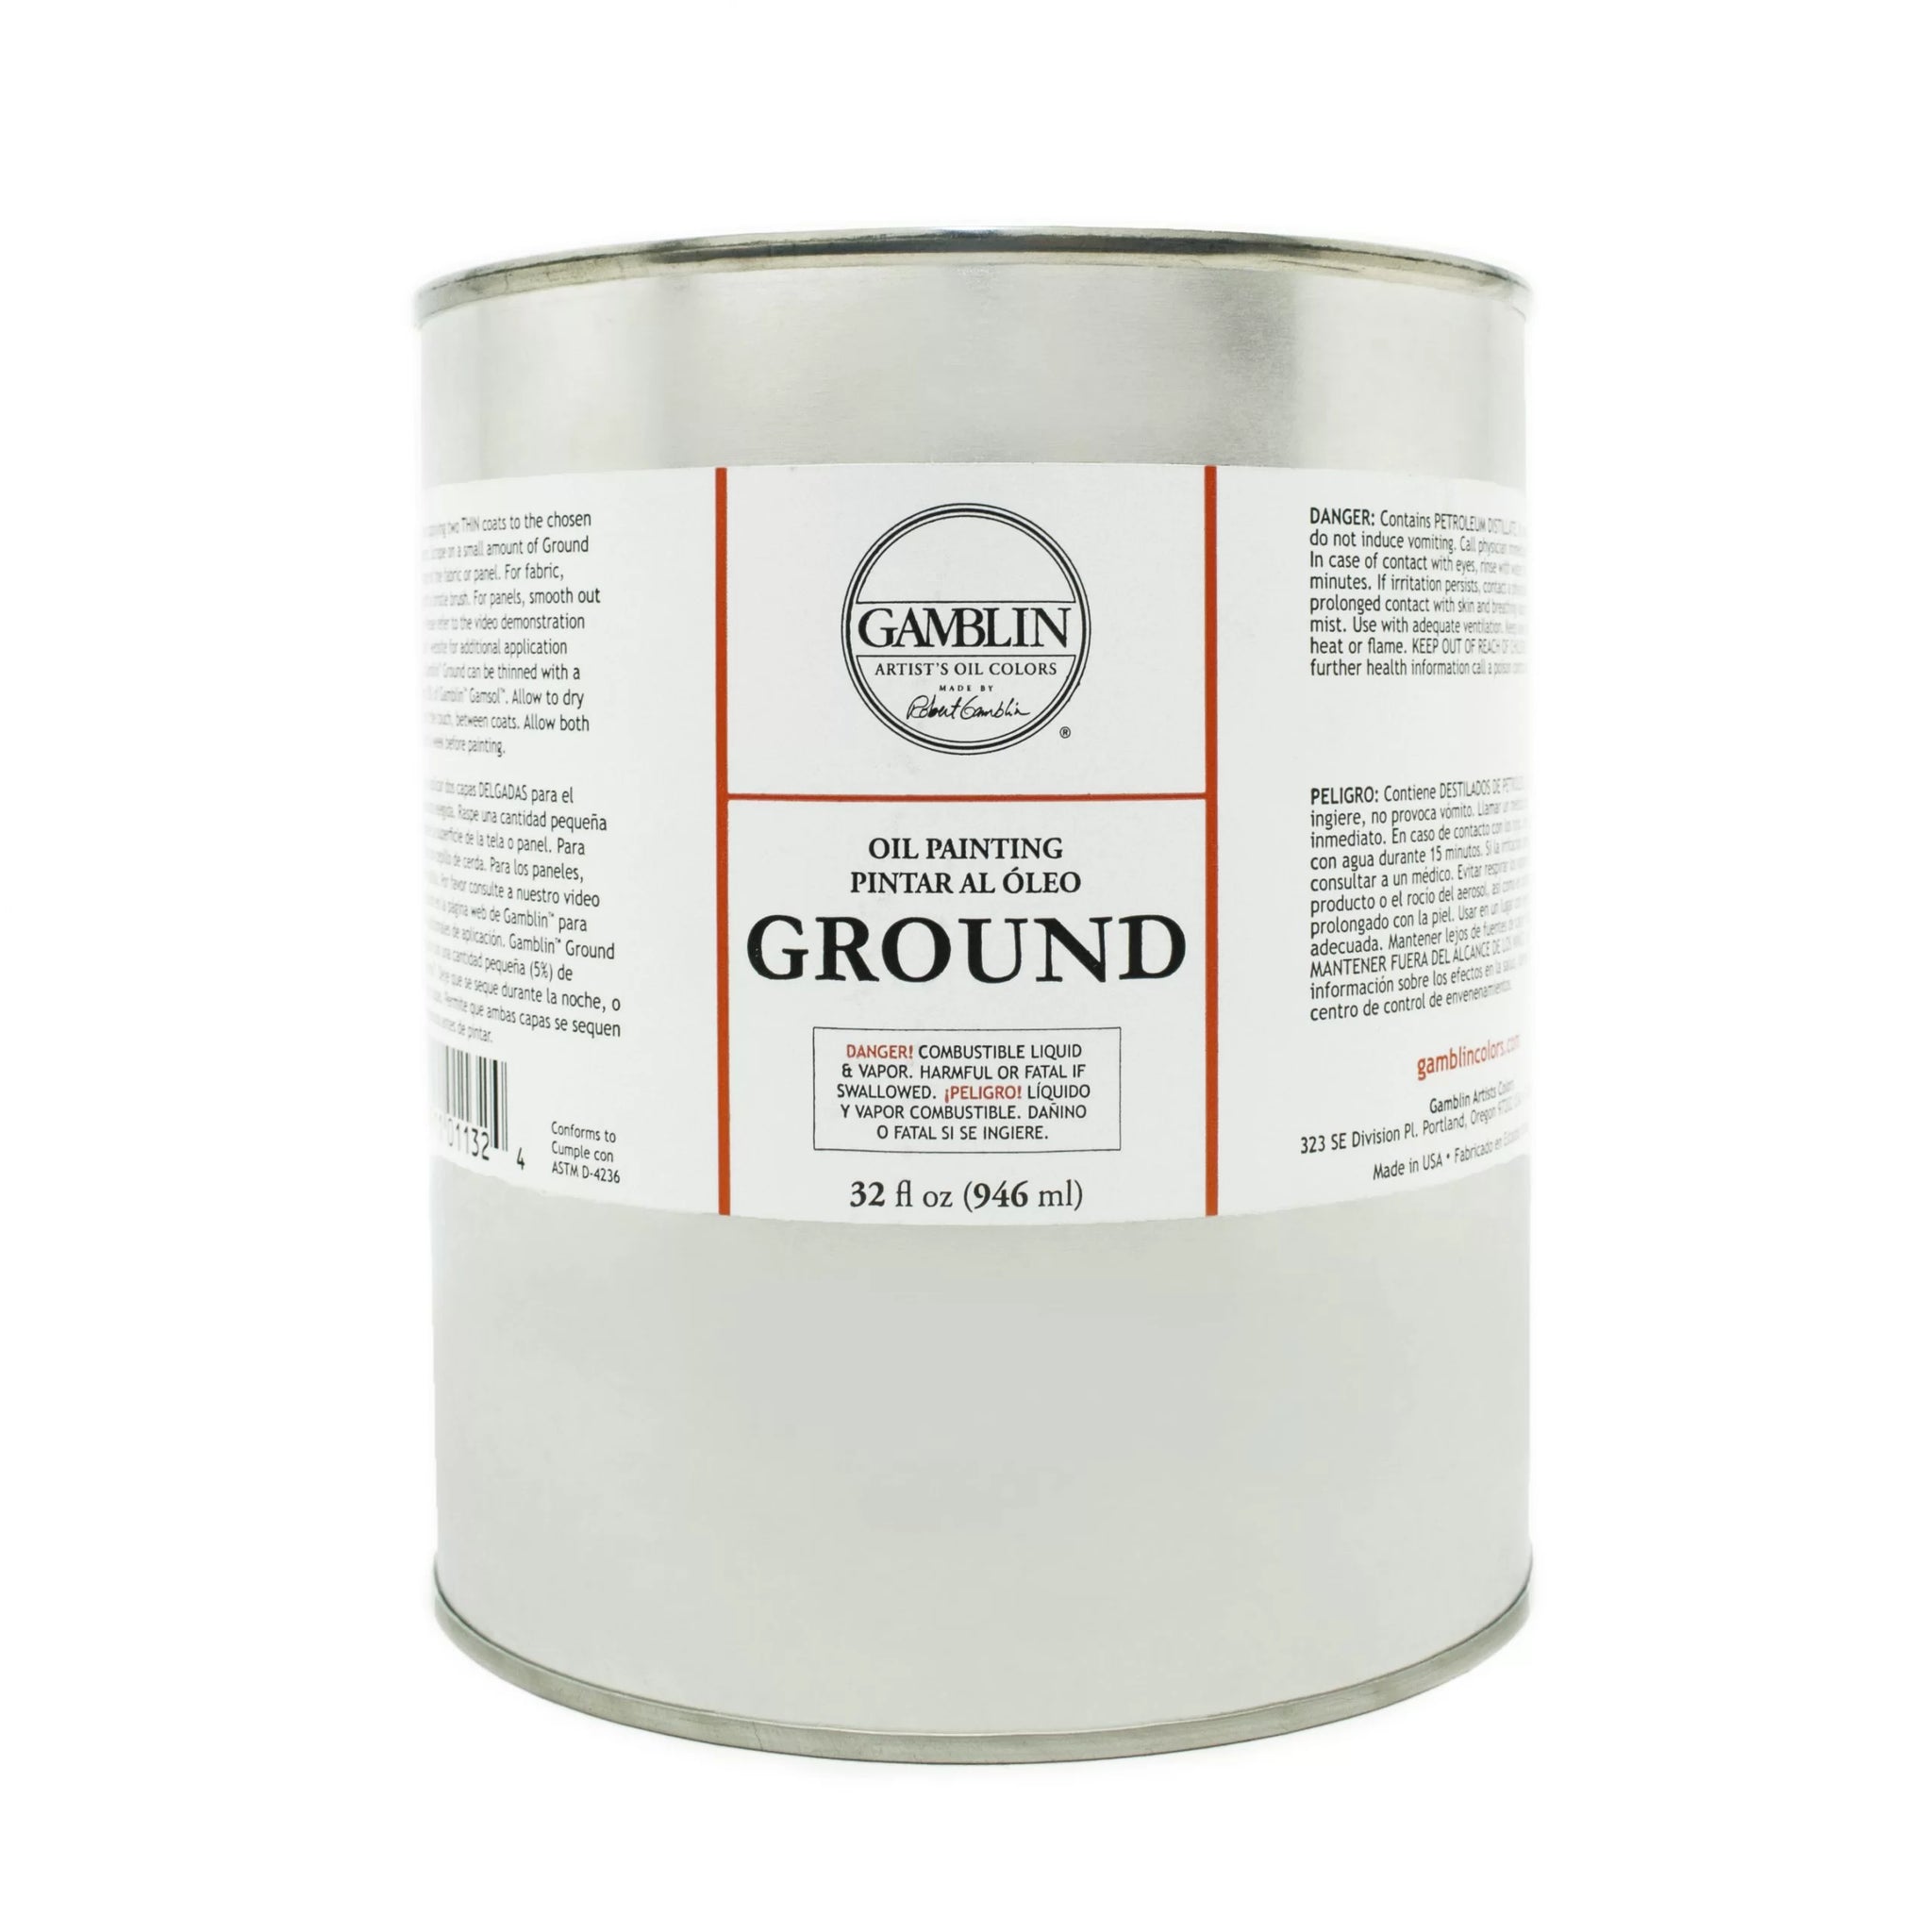 Gamblin Artists Oils - Ground / Gesso - Melbourne etching and Printmaking Supplies